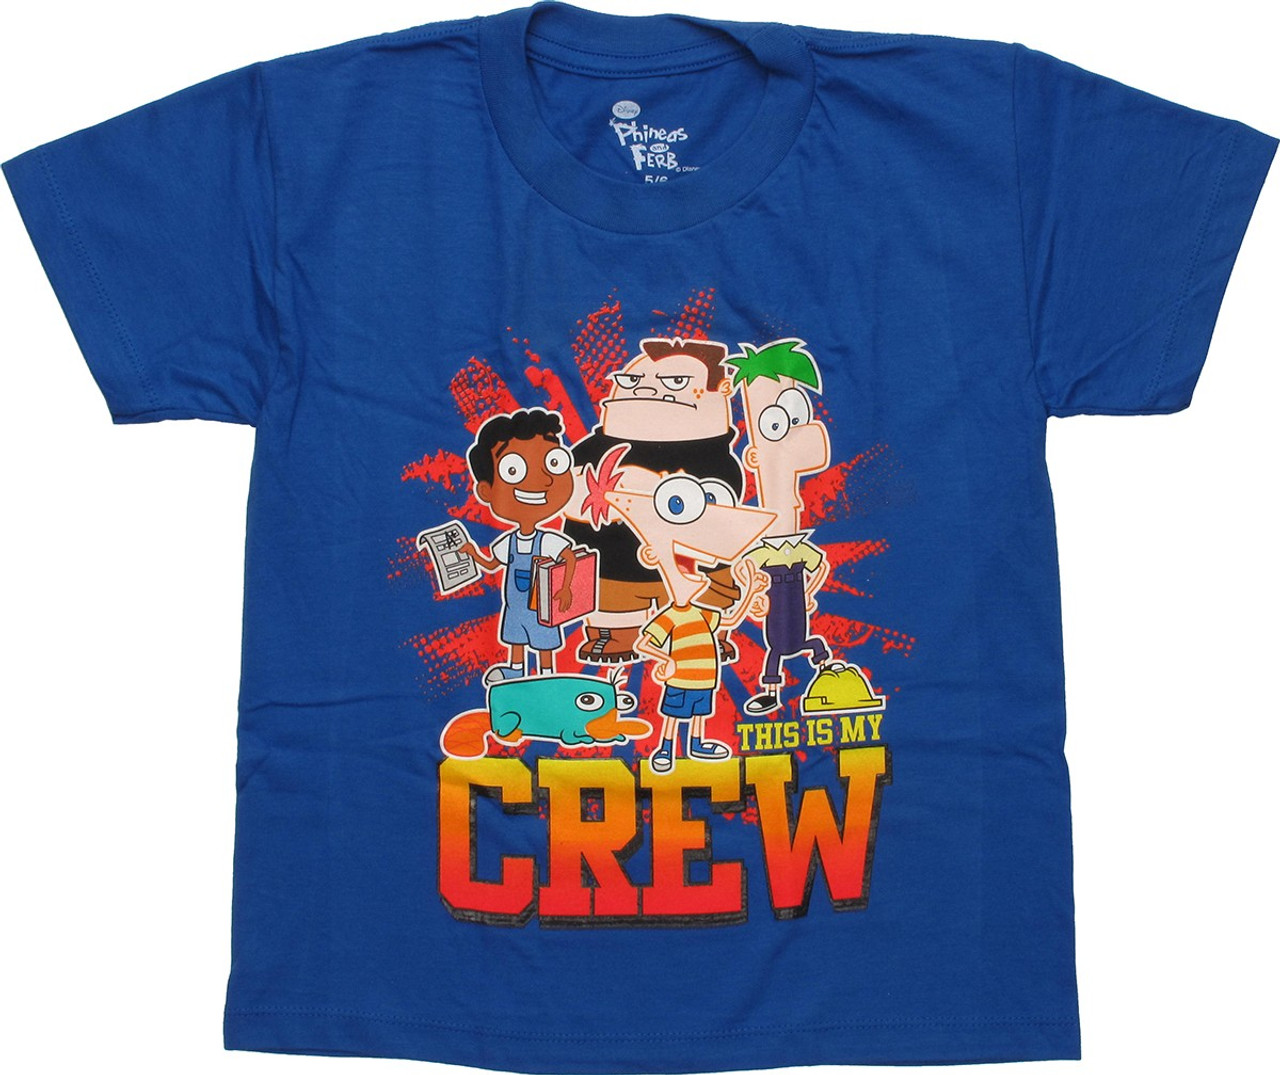 Phineas and Ferb St Louis Blues Youth T-Shirt